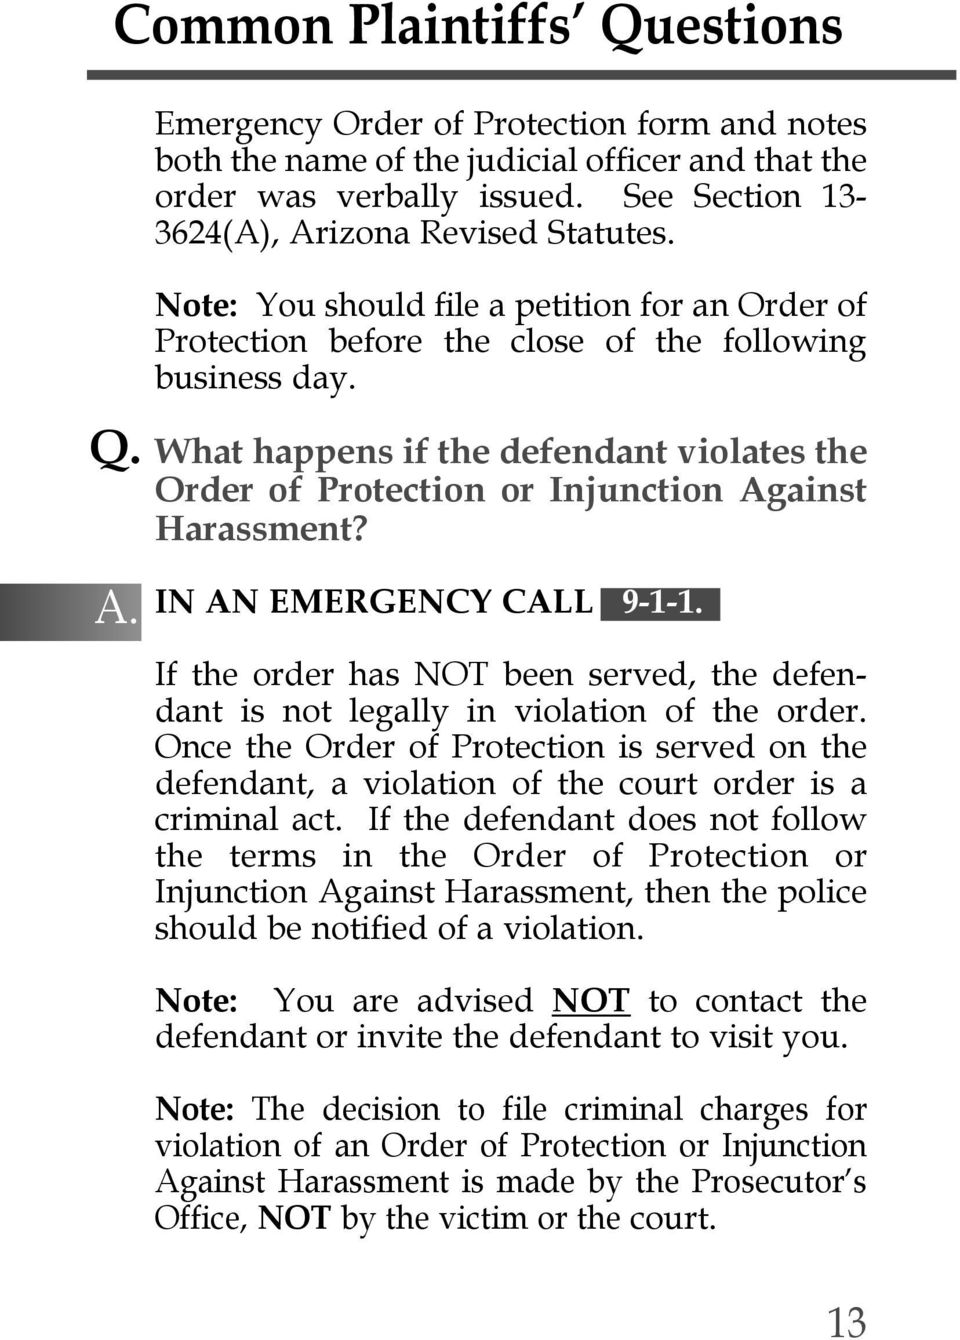 What happens if the defendant violates the Order of Protection or Injunction Against Harassment? IN AN EMERGENCY CALL 9-1-1.